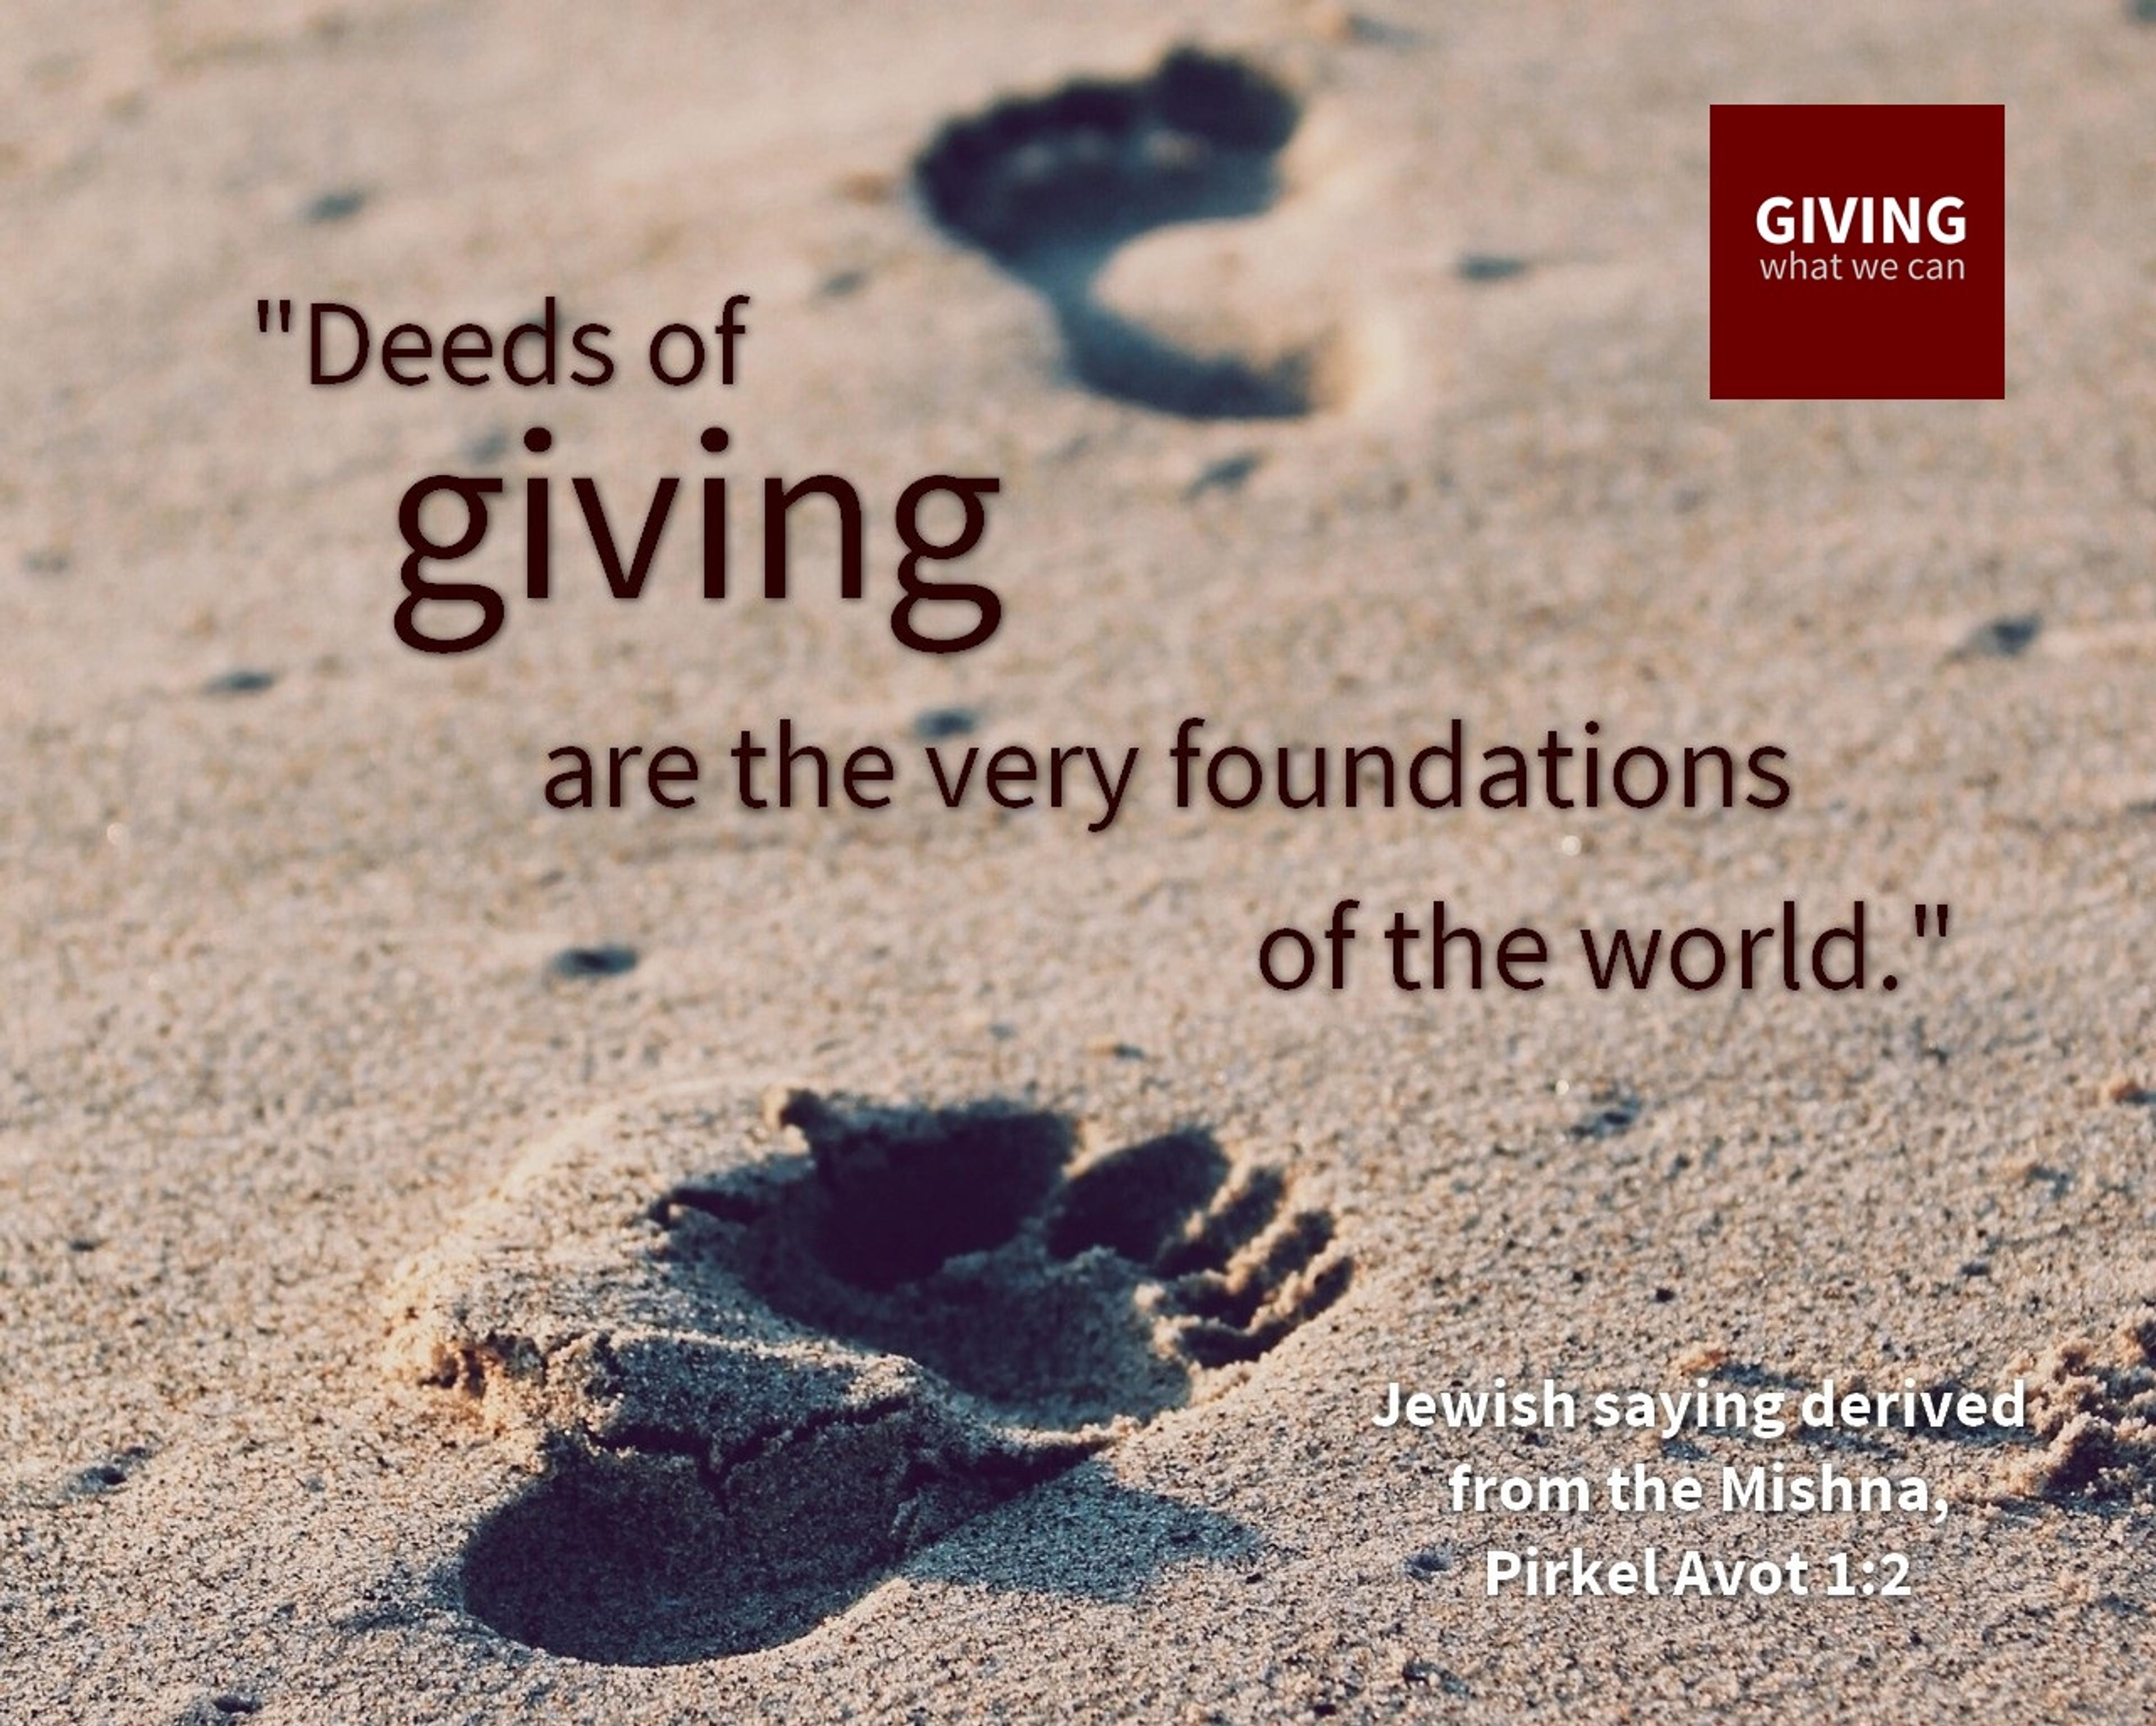 Deeds of giving are the very foundations of the world